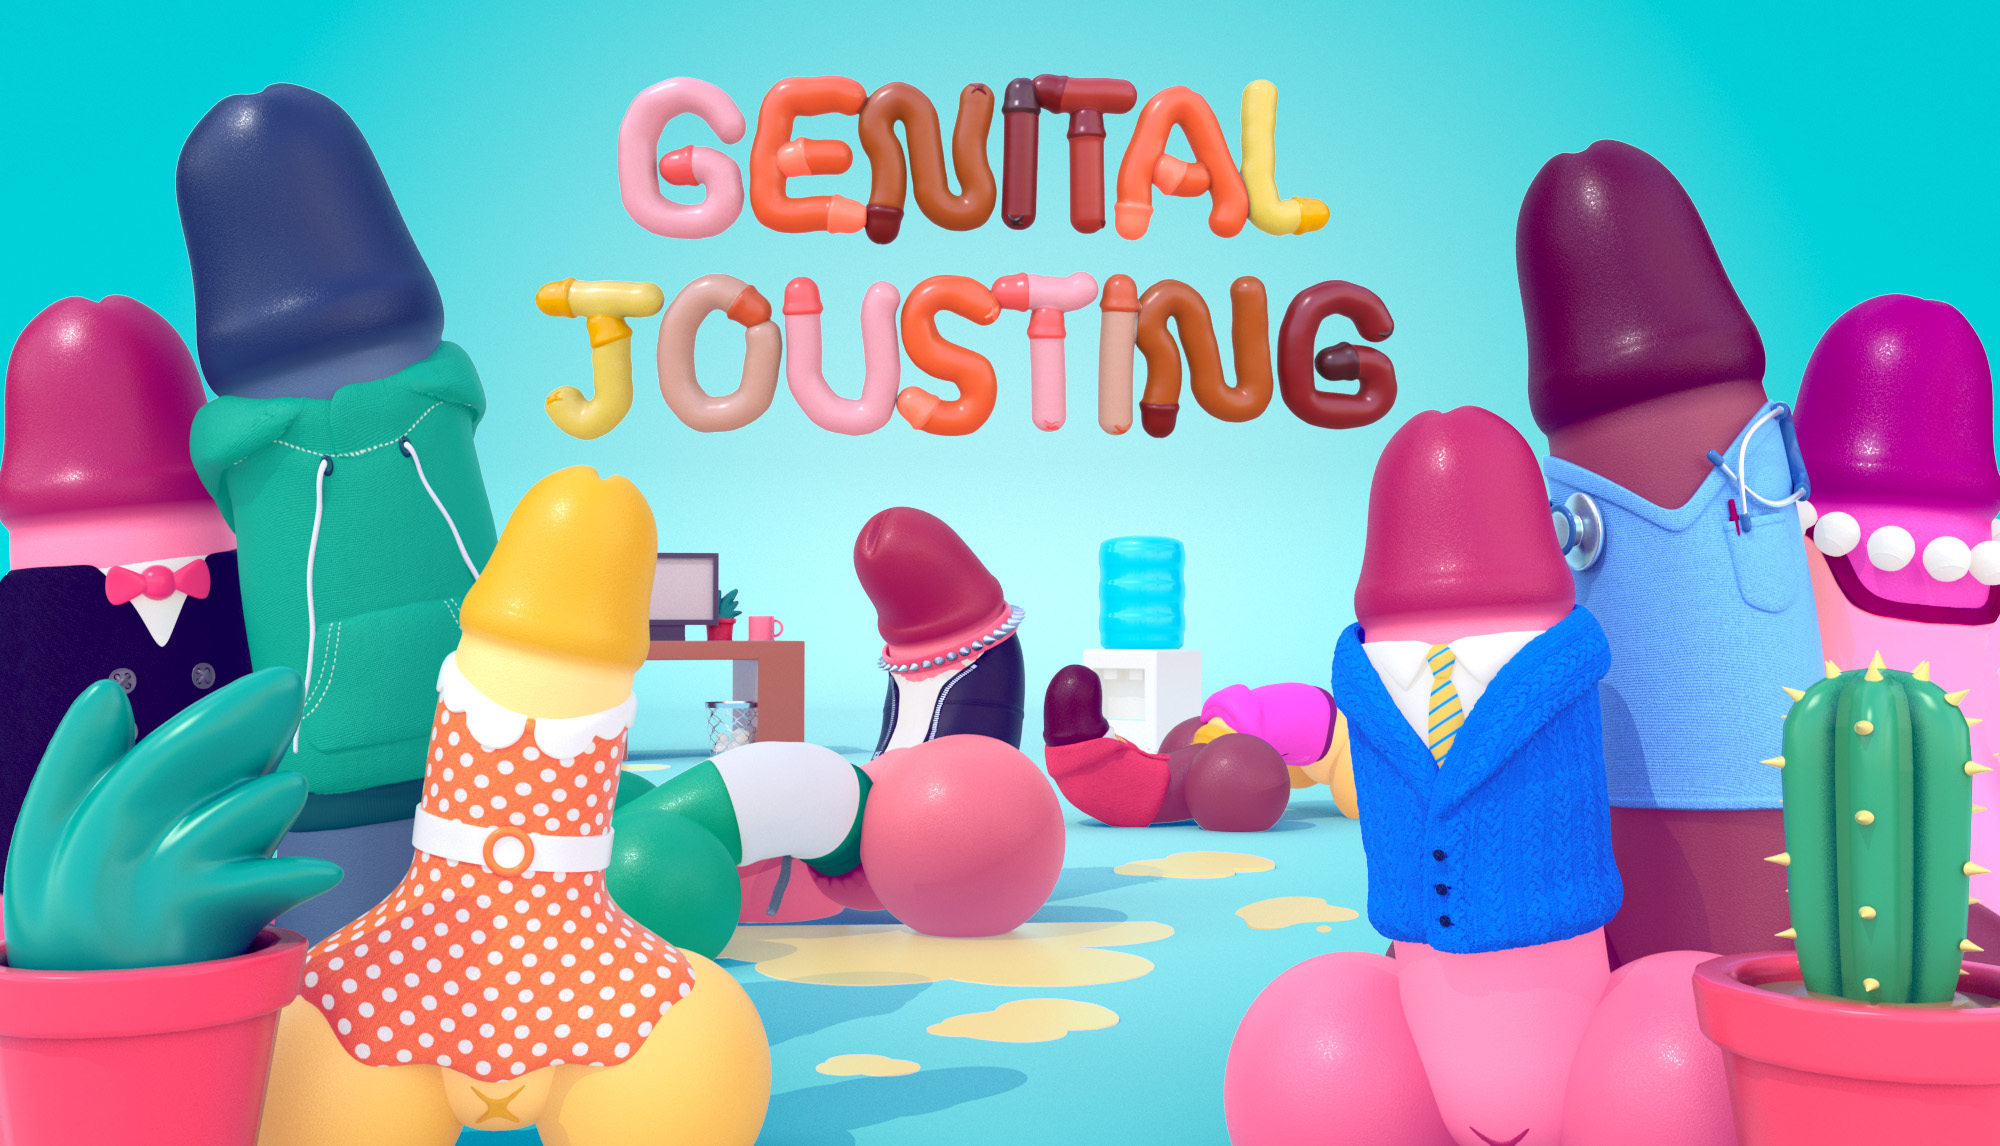 Several bright coloured penises in dresses, suits, and hoodies stand beneath the game title.